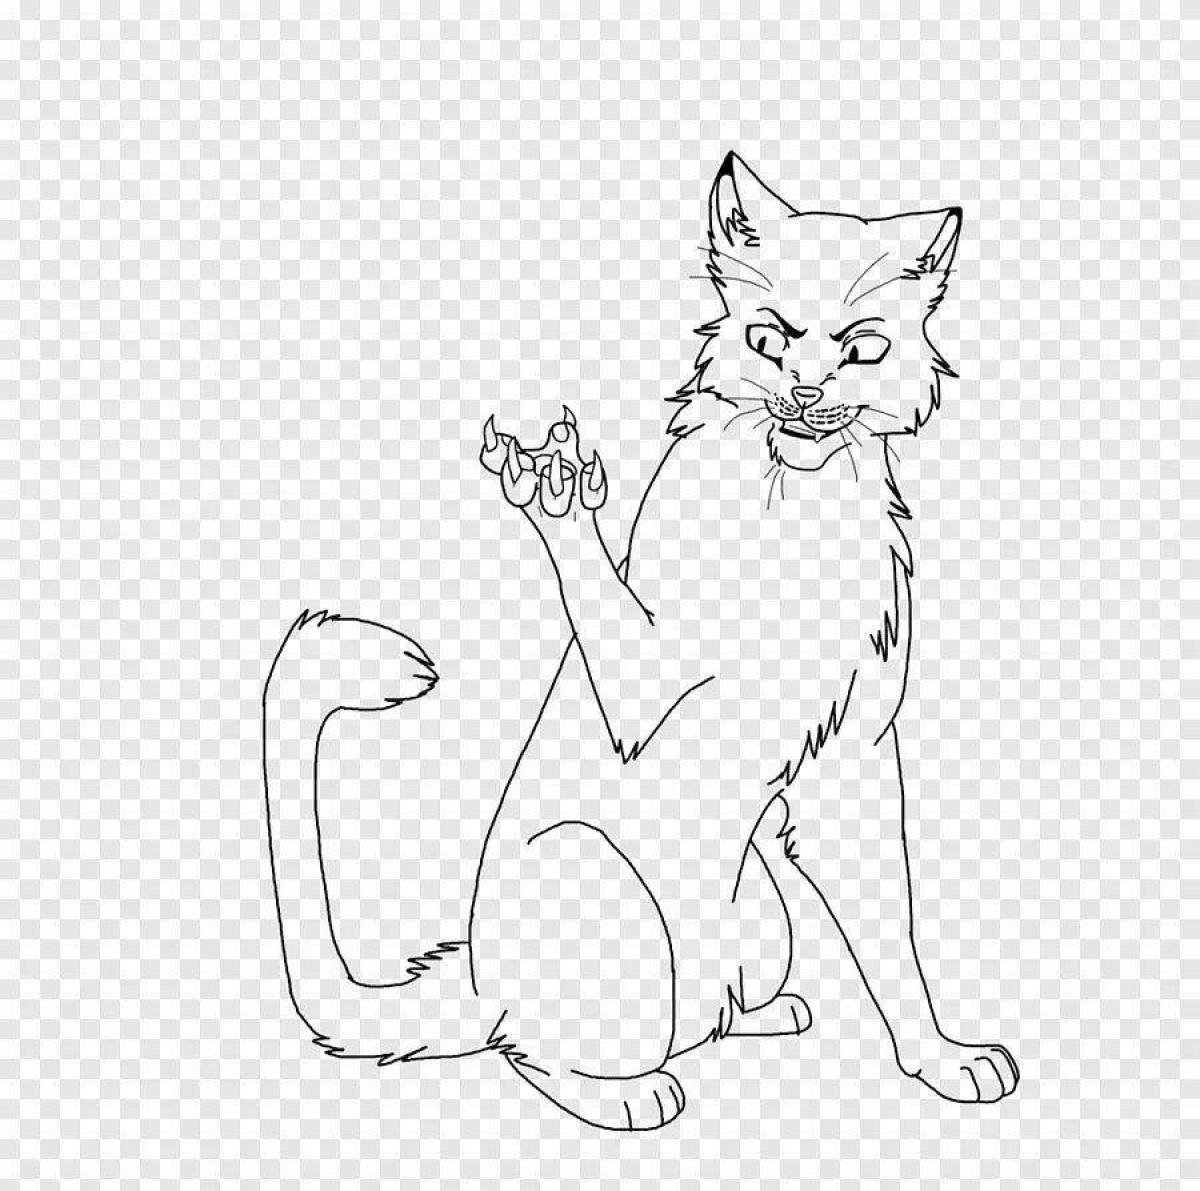 Coloring page angry cat